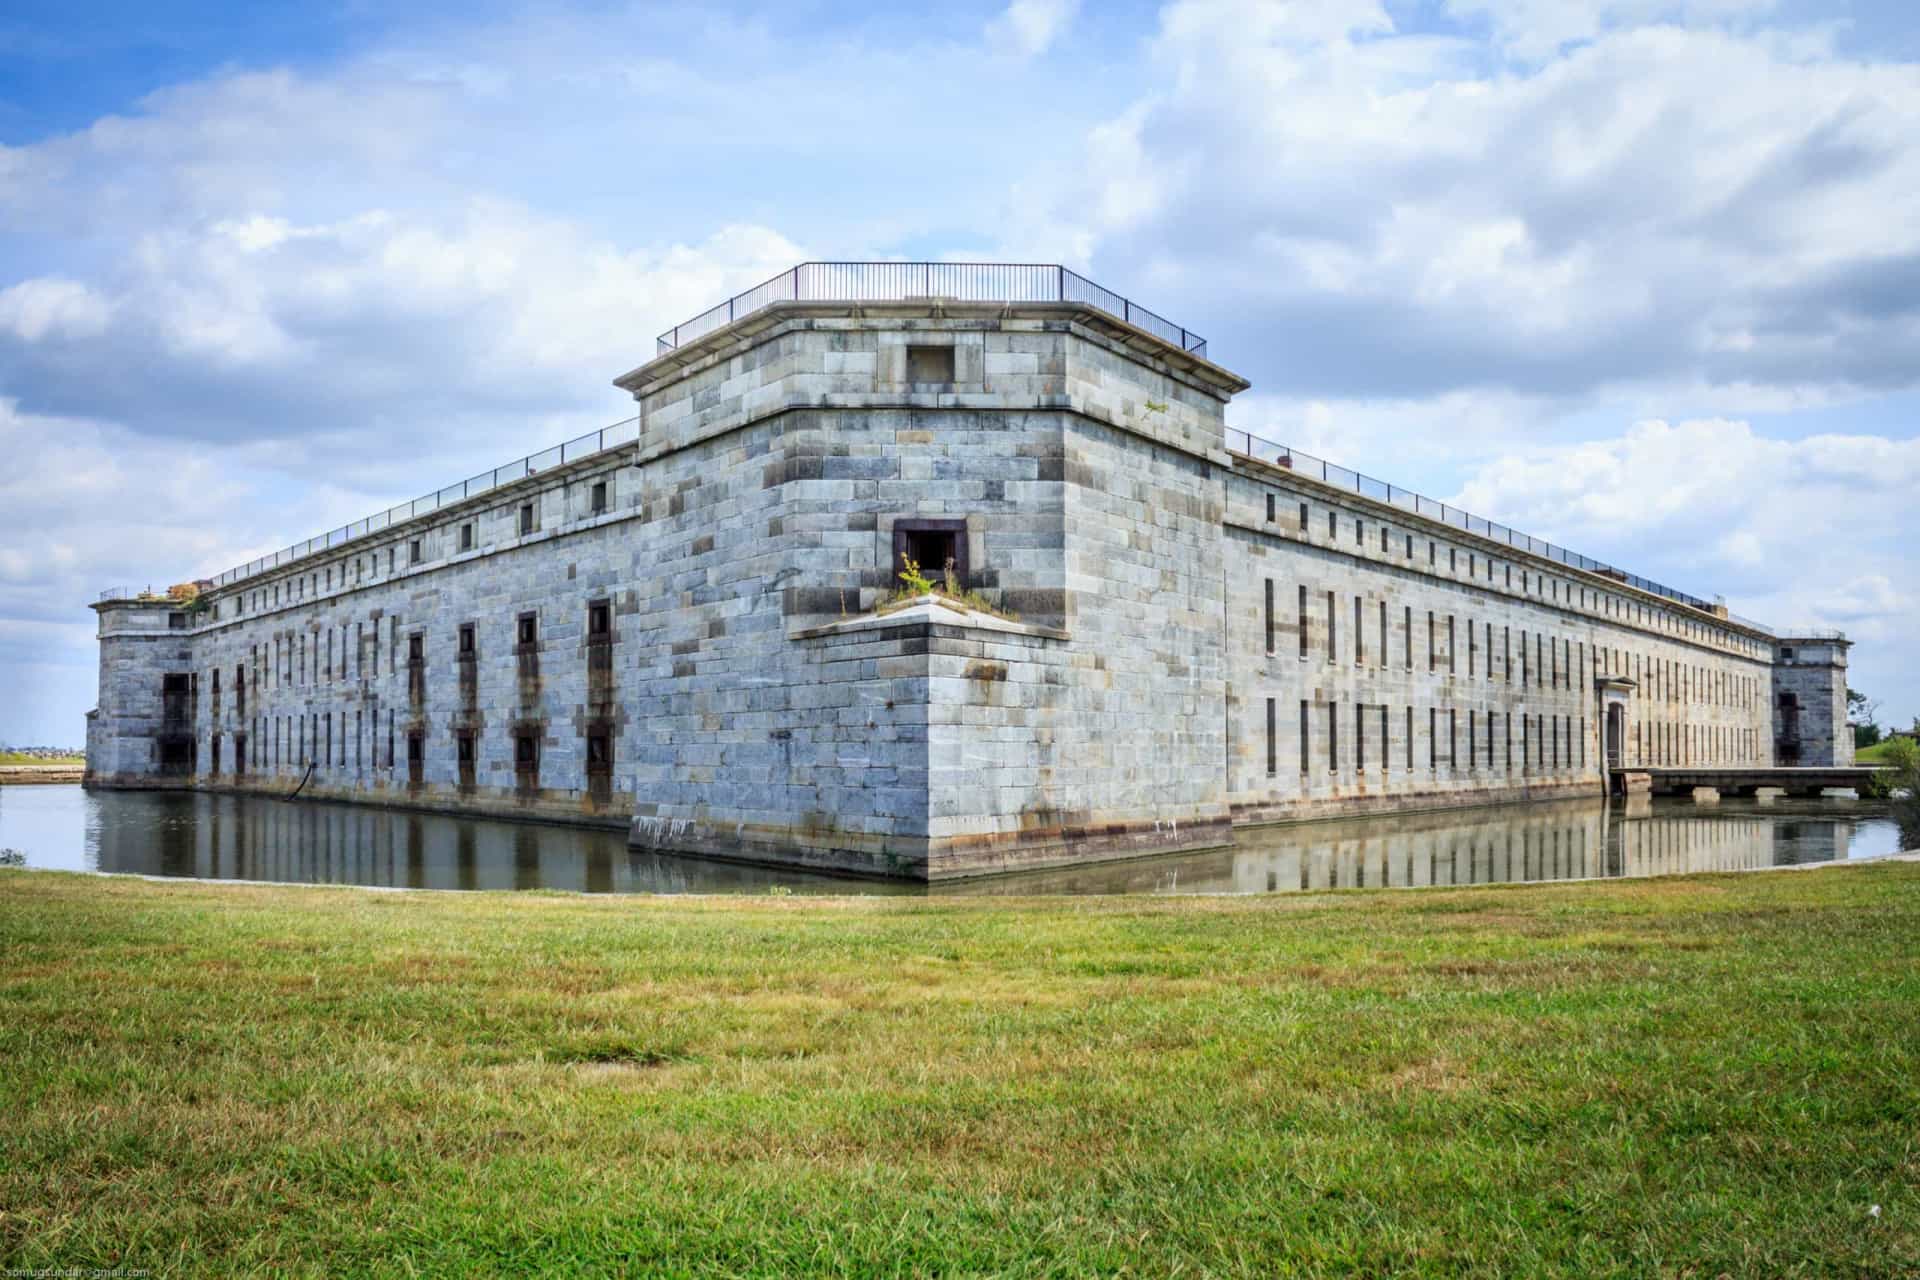 <p>Around 2,700 prisoners are said to have died in extremely poor conditions at Fort Delaware, on Pea Patch Island in the Delaware River. So it doesn't really come as a surprise that this is the state's most haunted place.</p>